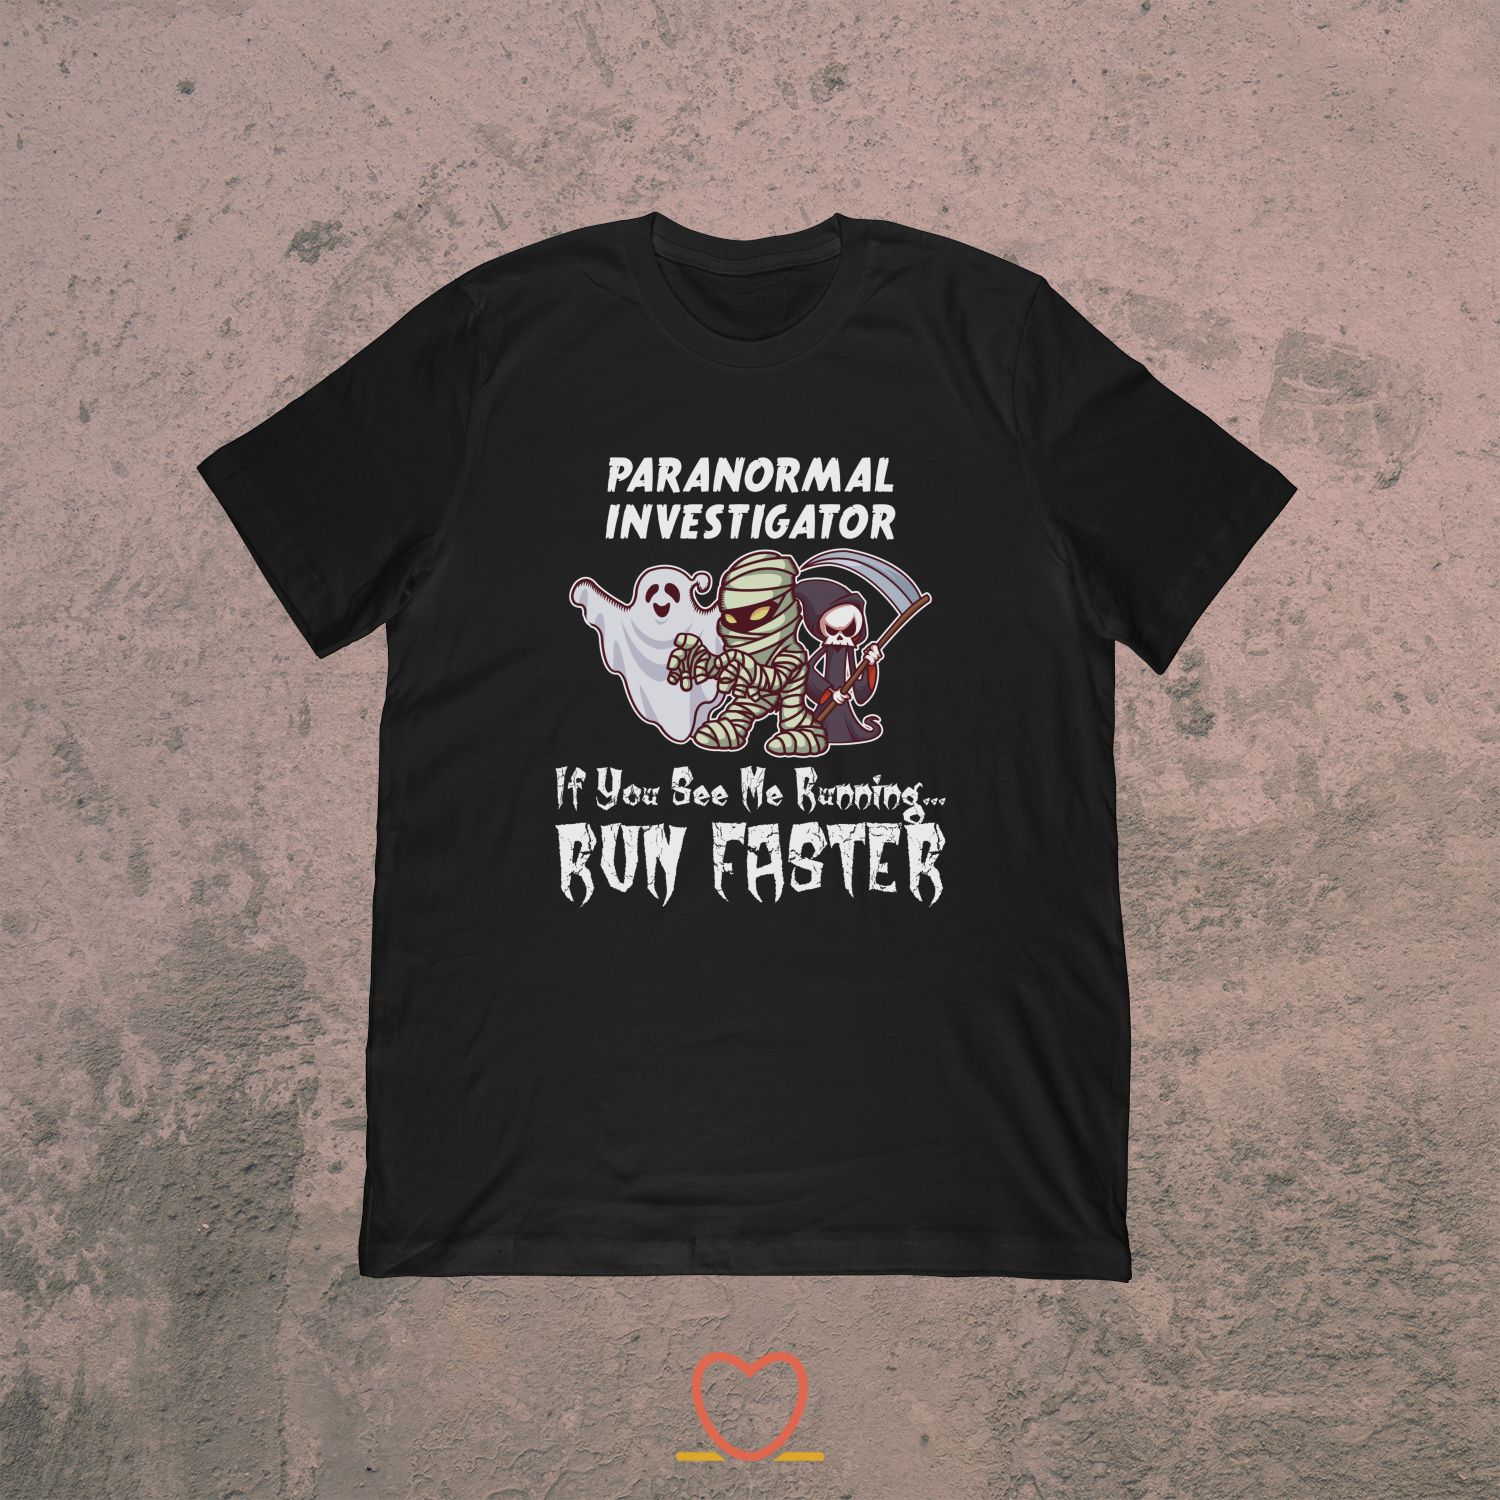 If You See Me Running Run Faster – Paranormal Investigator Tee